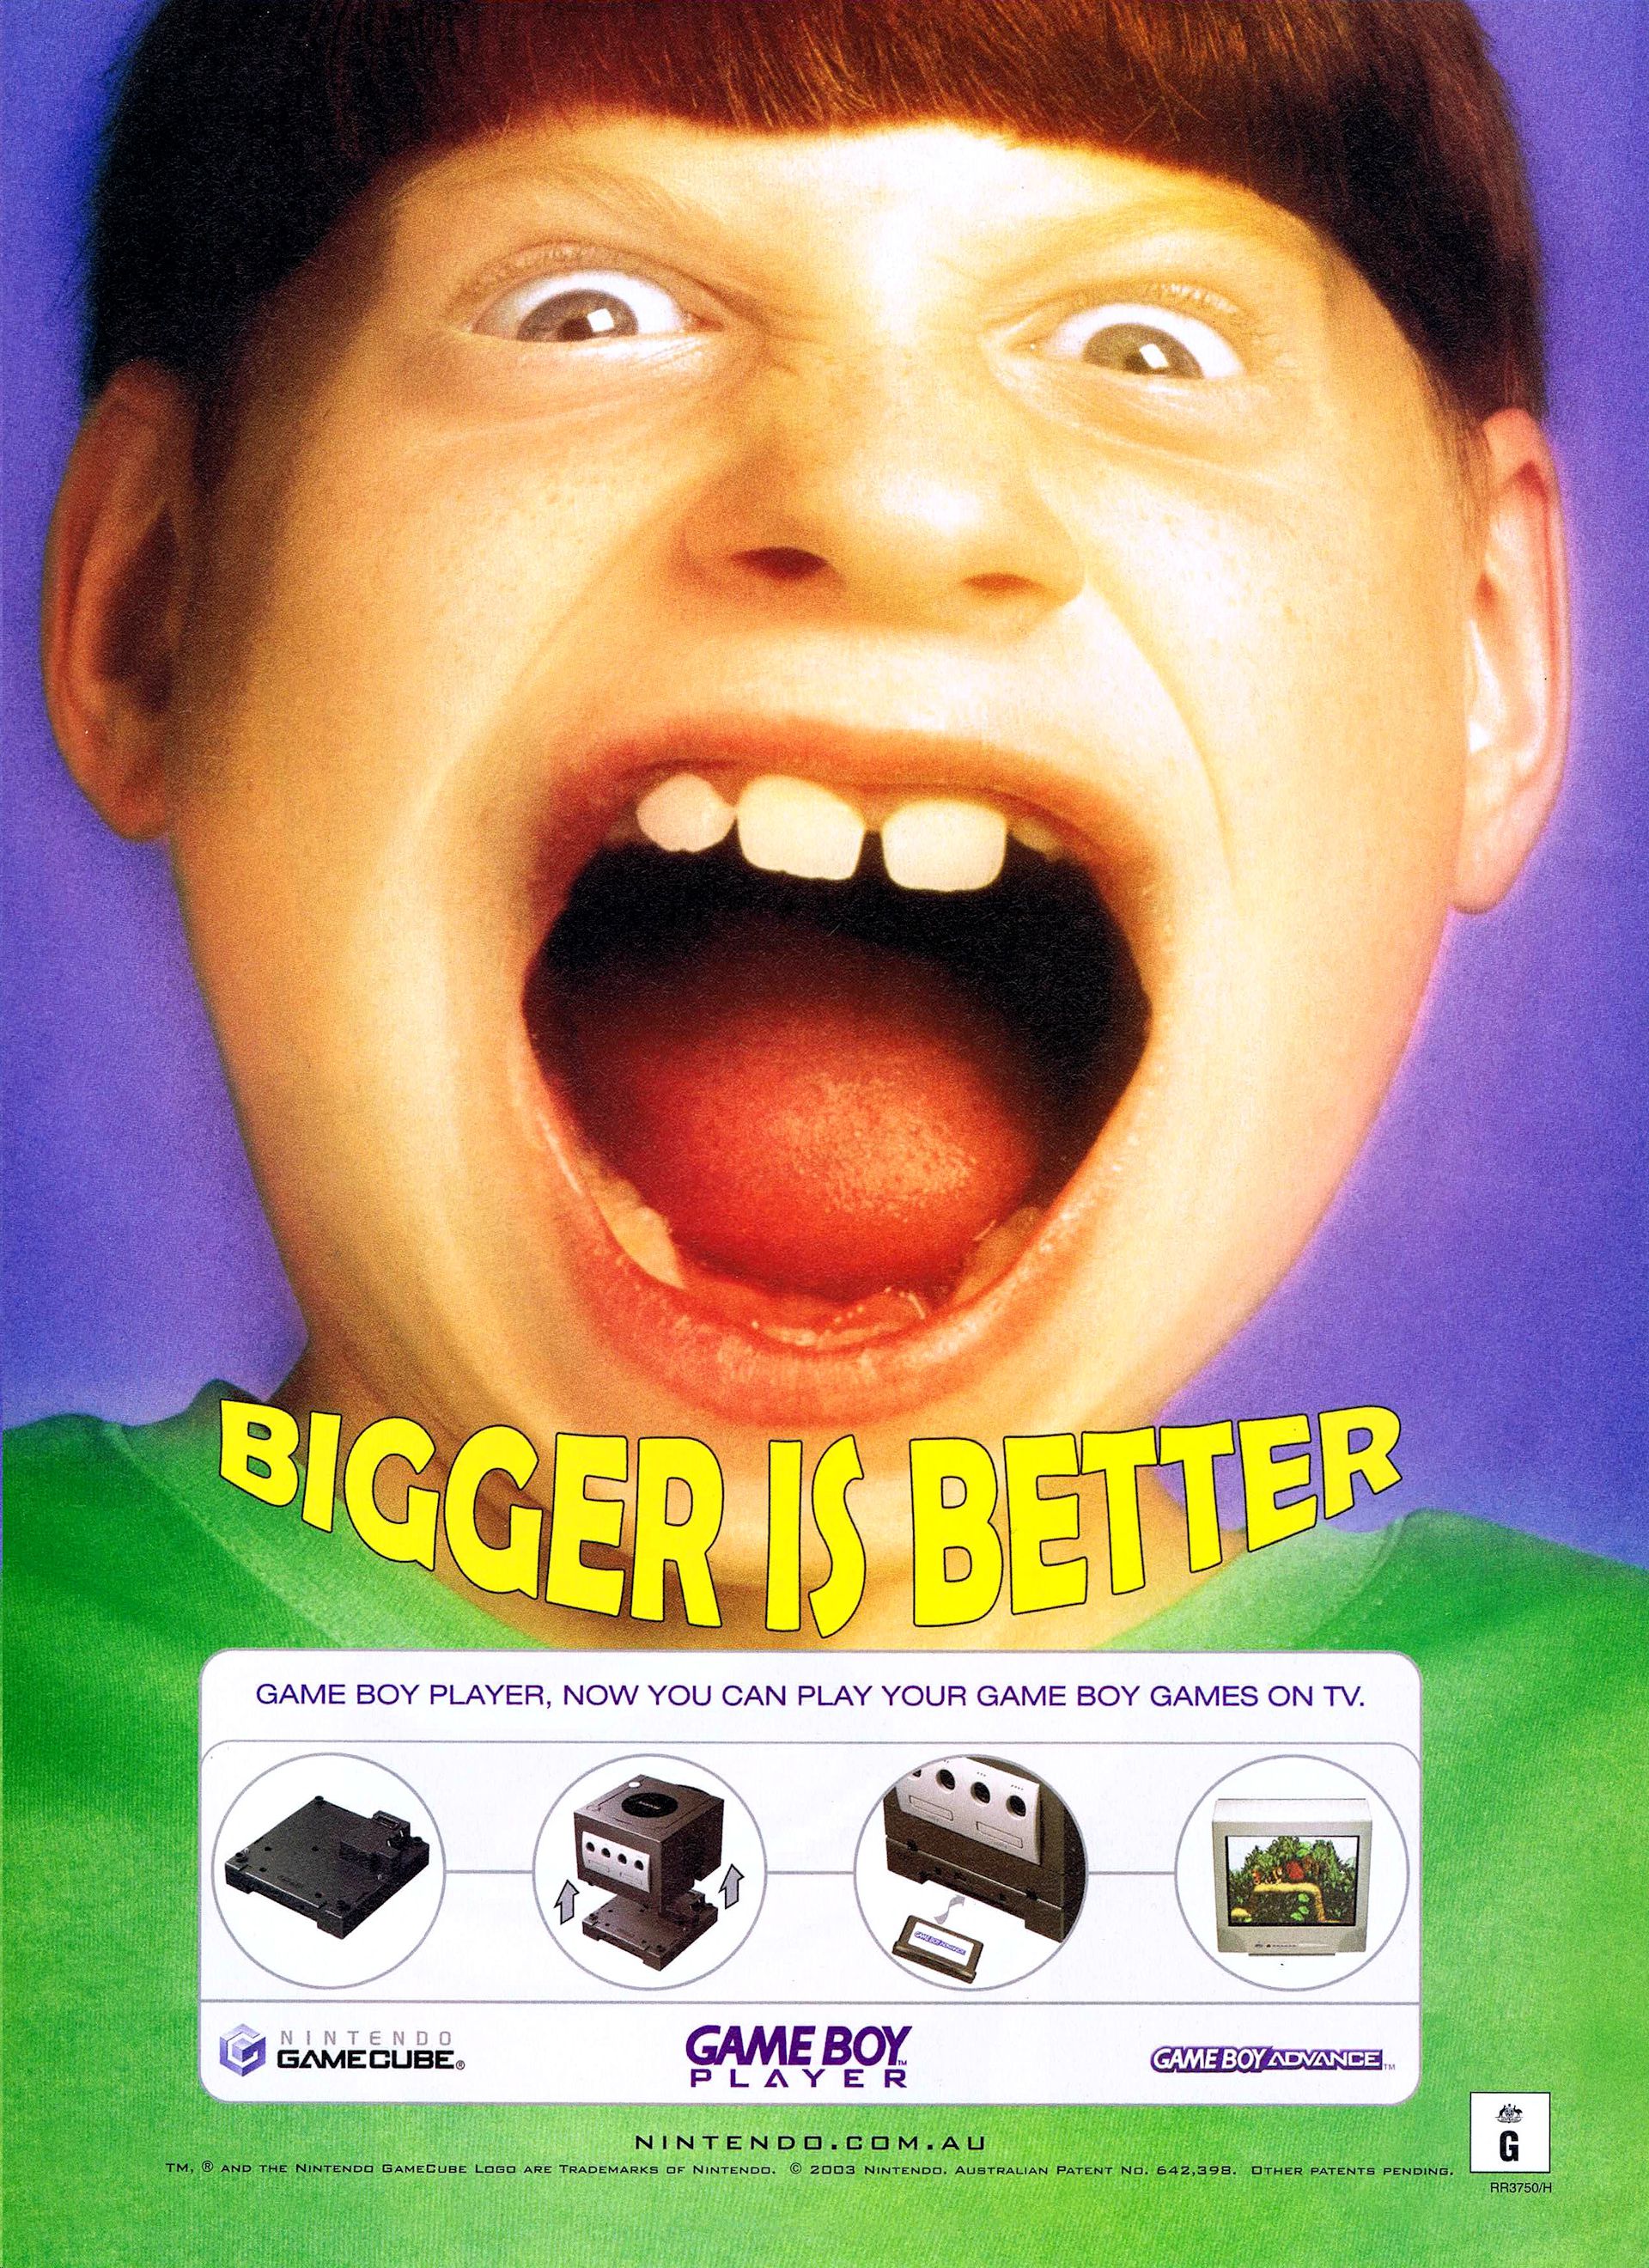 Nintendo Australia didn’t advertise much in the GameCube era, but even when they did, it was positively awful. Behold. The Game Boy Player was an attachment for your GameCube which […]